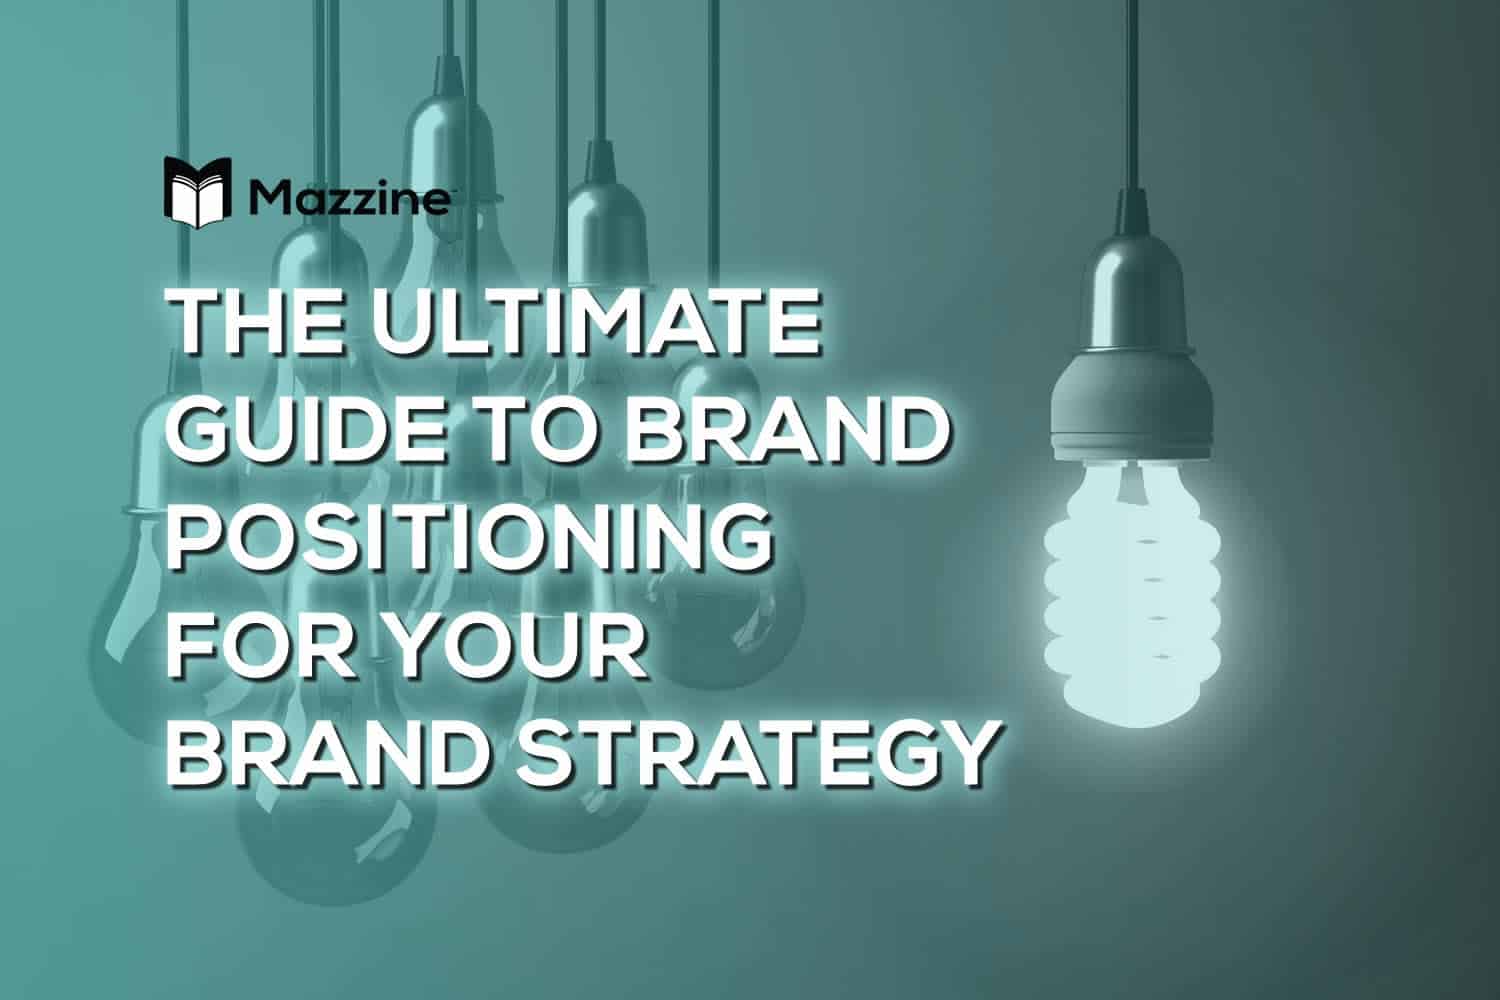 The Ultimate Guide to Brand Positioning for Your Brand Strategy